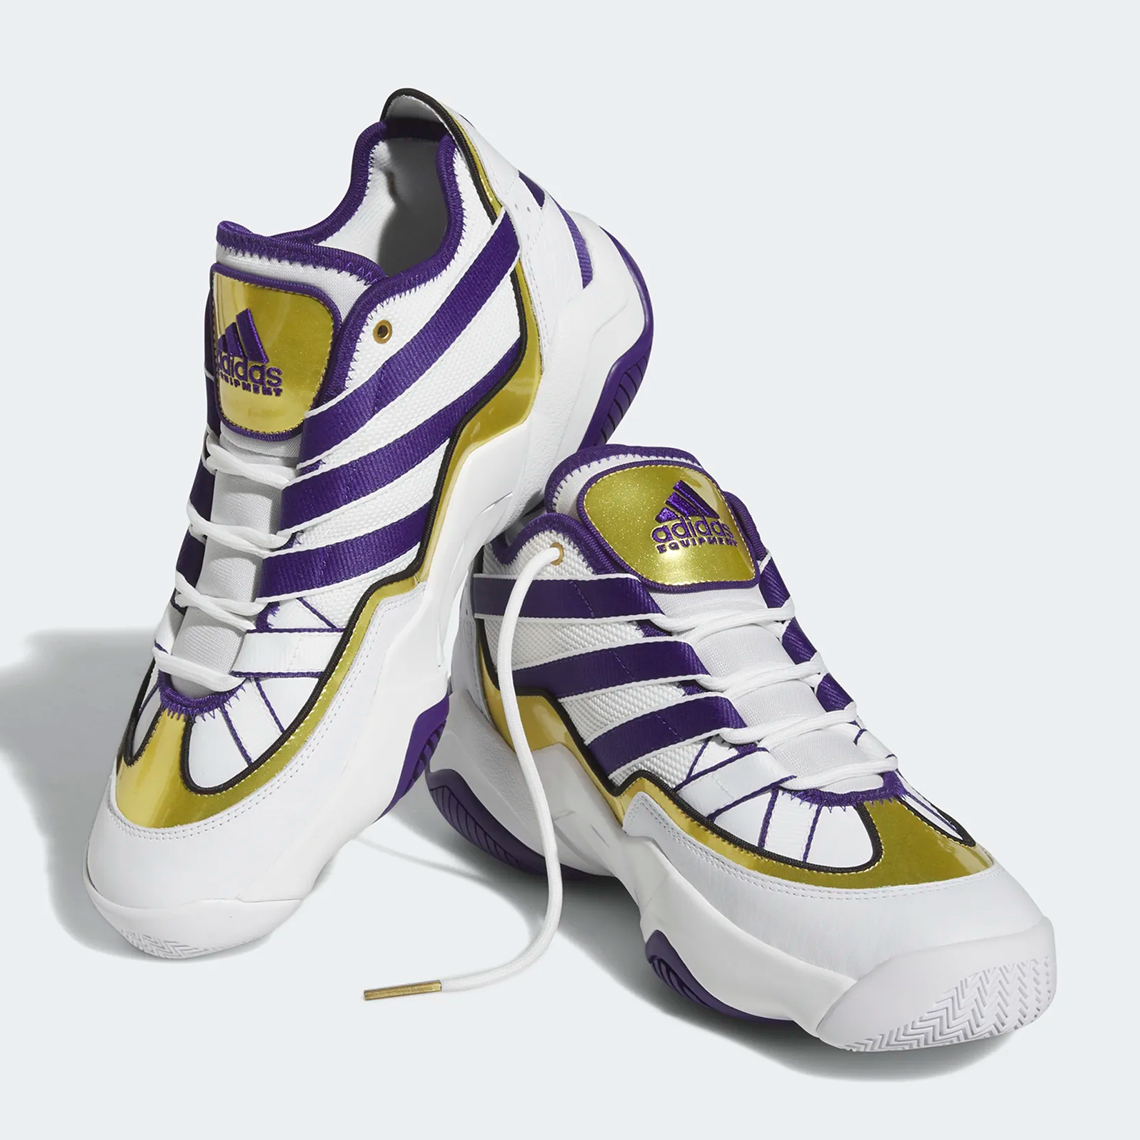 adidas schemes Top Ten 2010 Lakers Hq4624 6